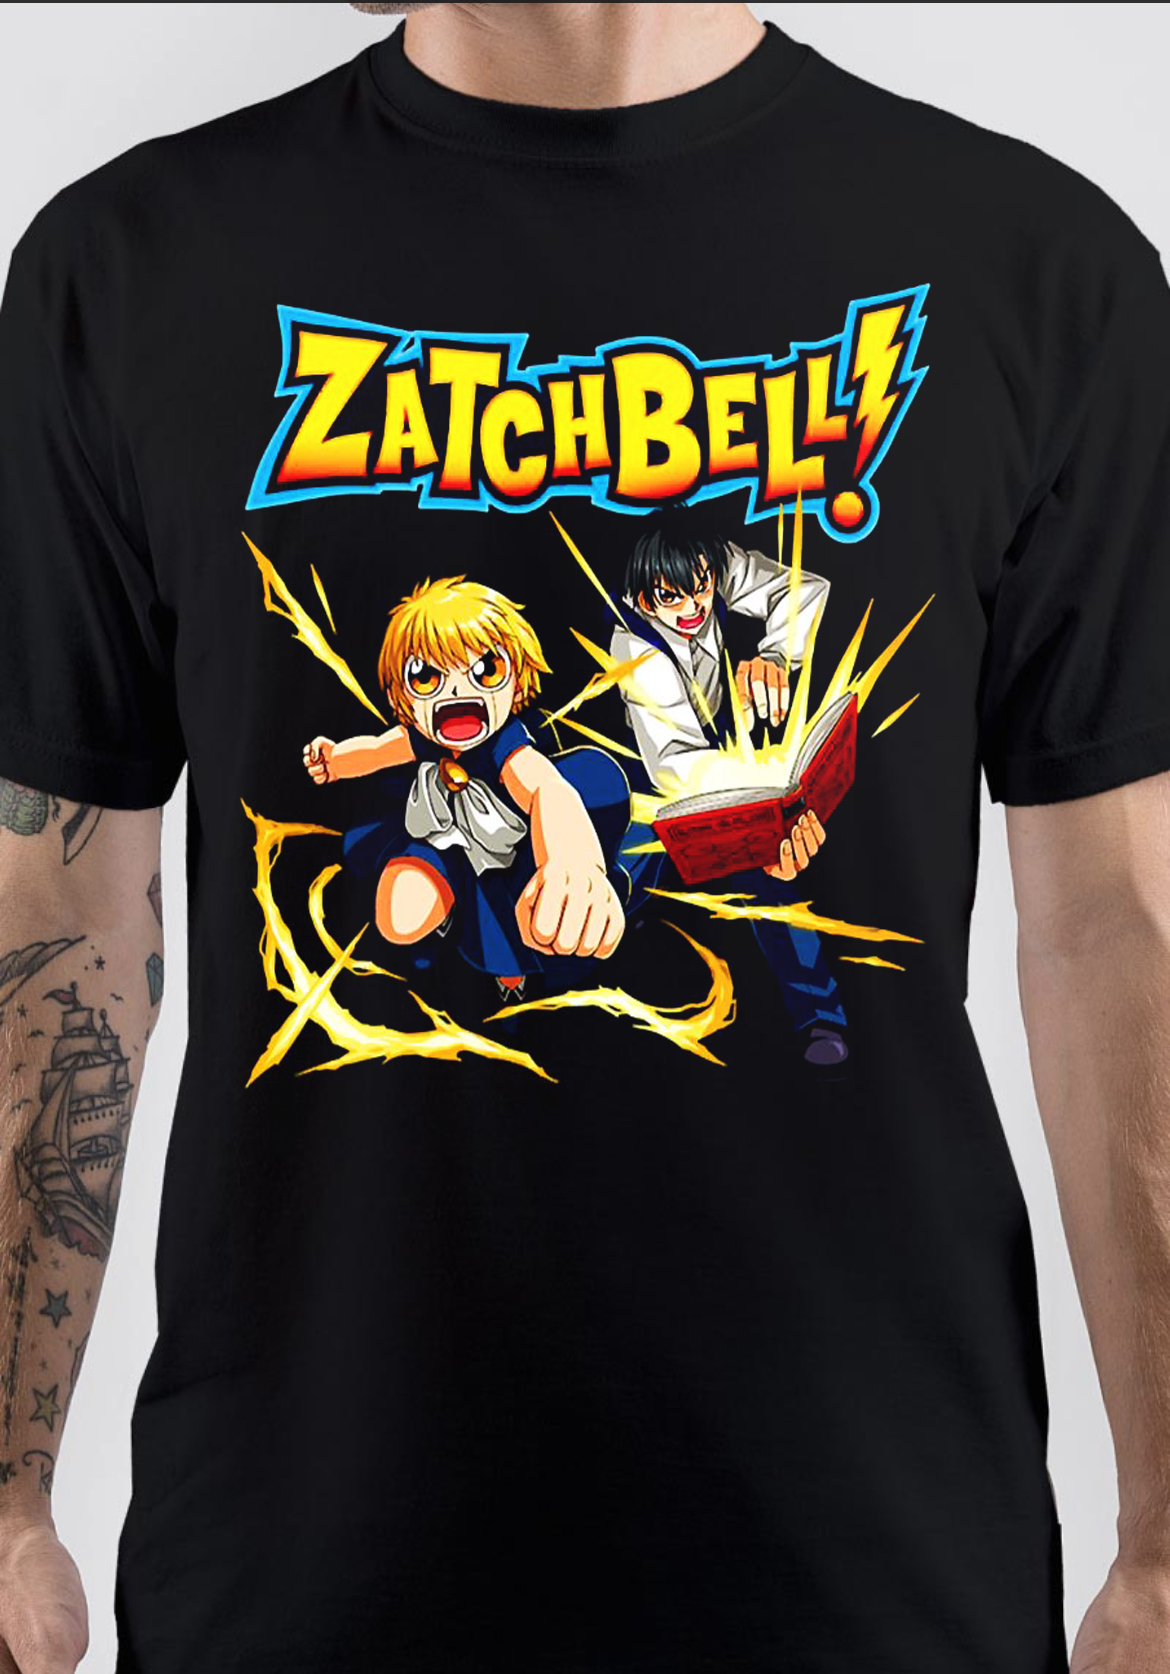 Hypland ZATCH BELL! FAMILY SHIRT (BLACK). Online sell at Outlet